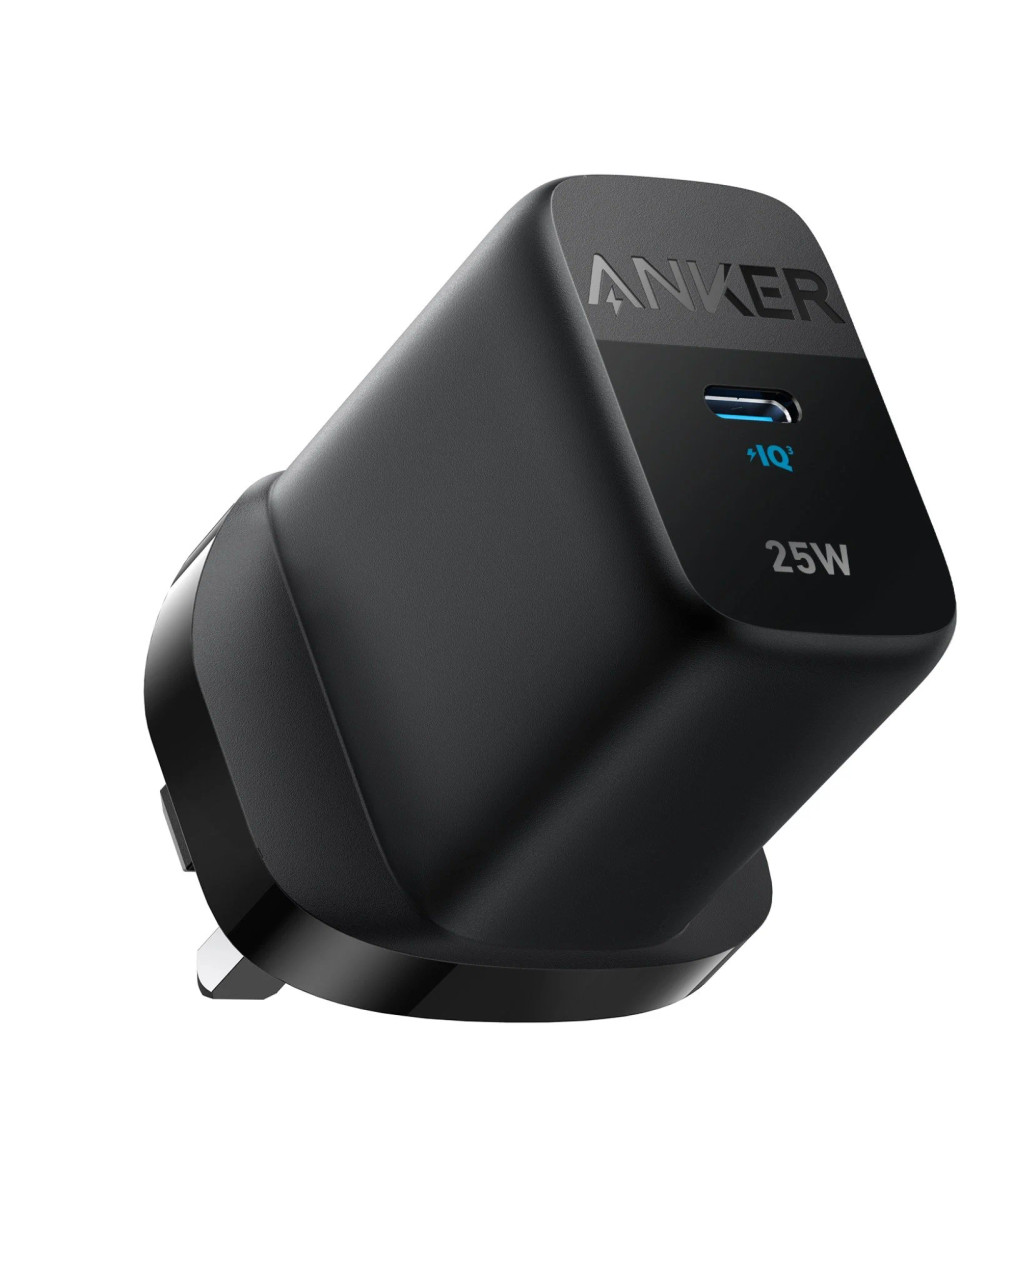 Anker 312 25W Wall Charger | A2642K11 | AYOUB COMPUTERS | LEBANON